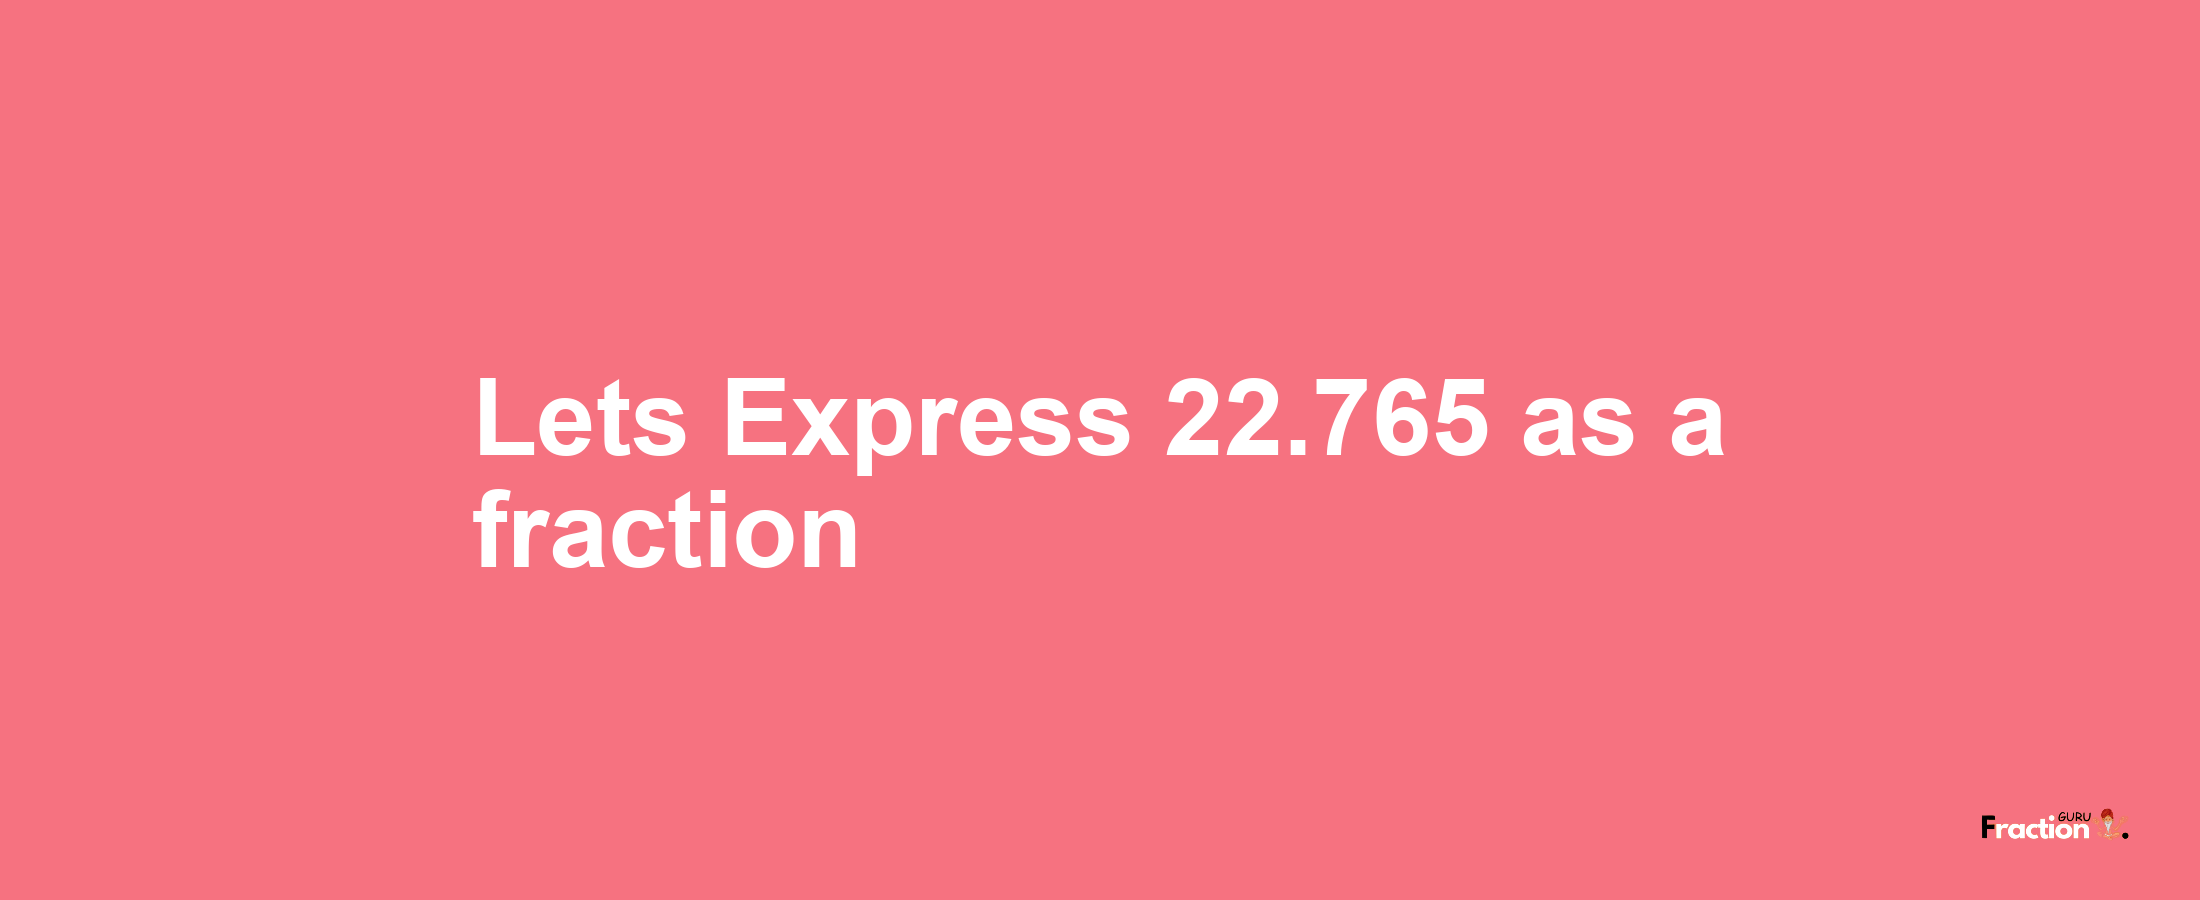 Lets Express 22.765 as afraction